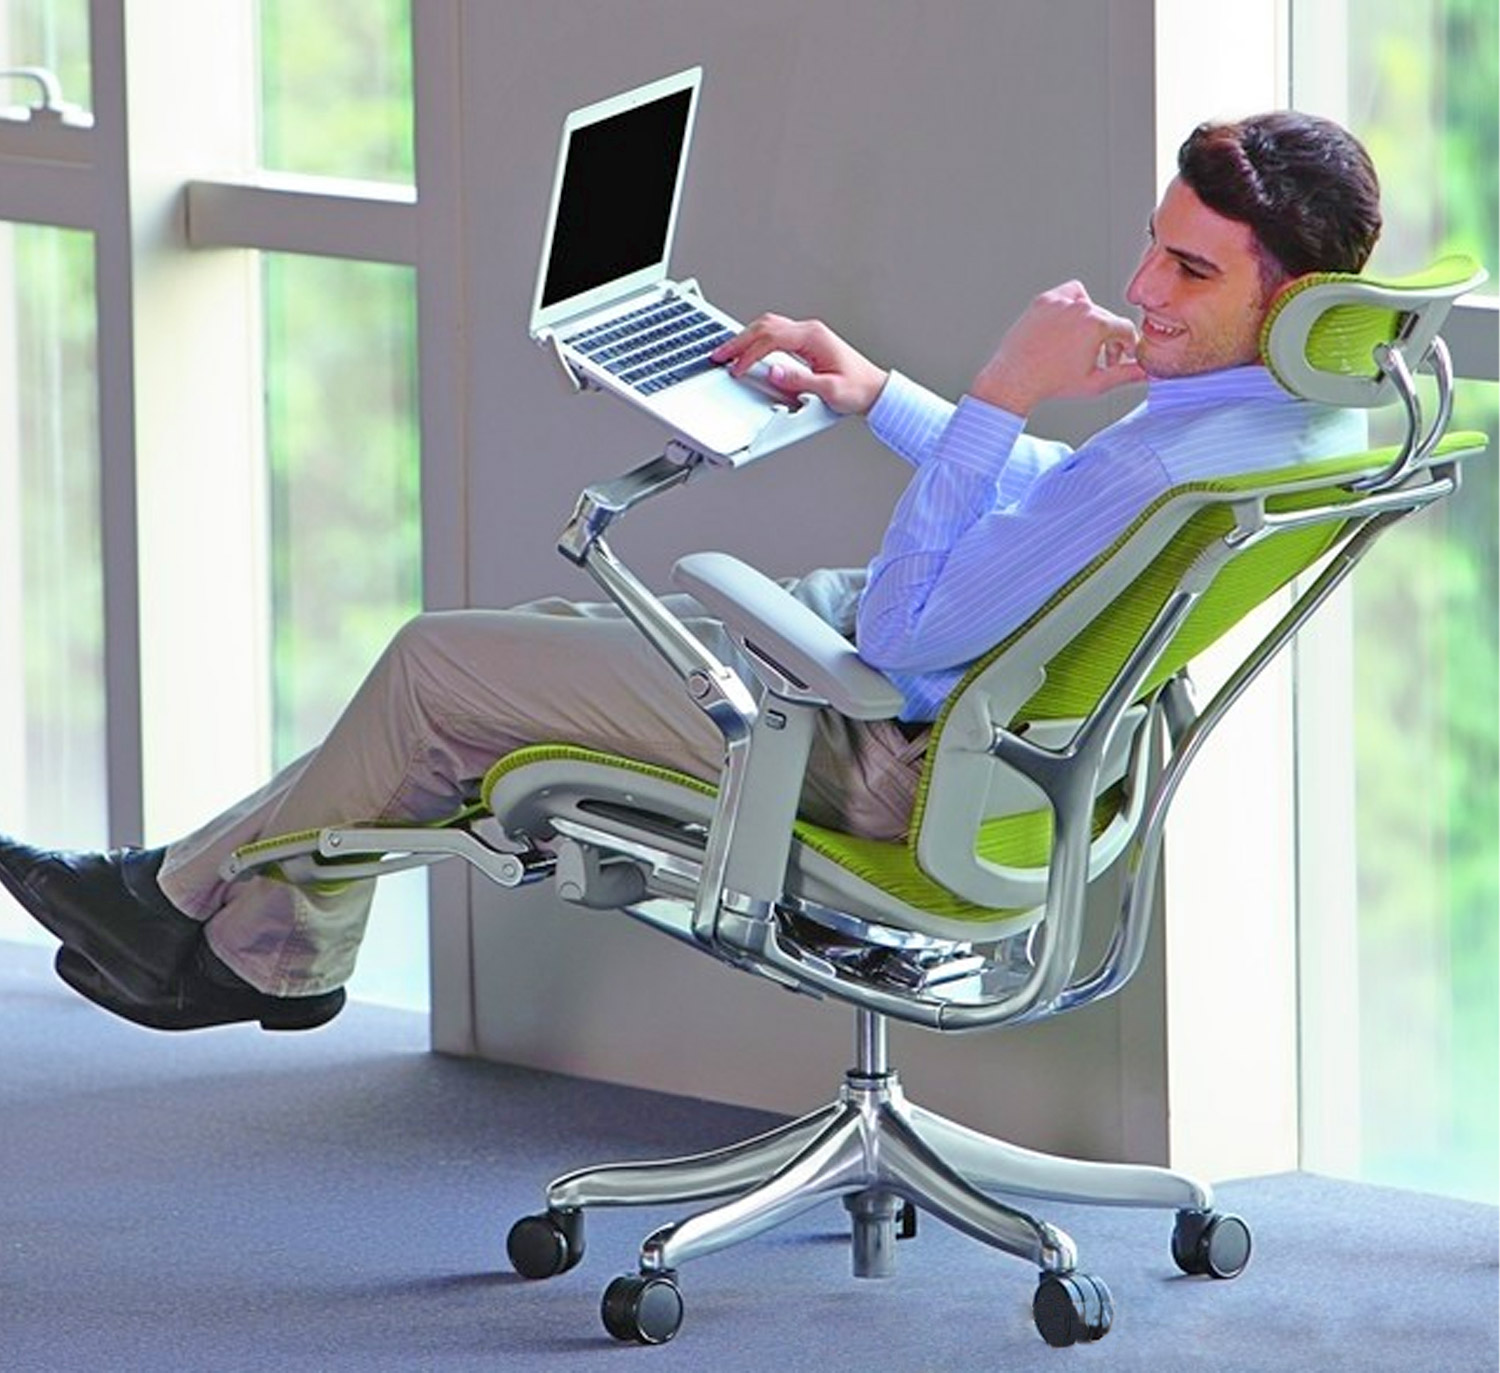 The Ultimate Desk Chair: Your Ticket to Comfort and Productivity!